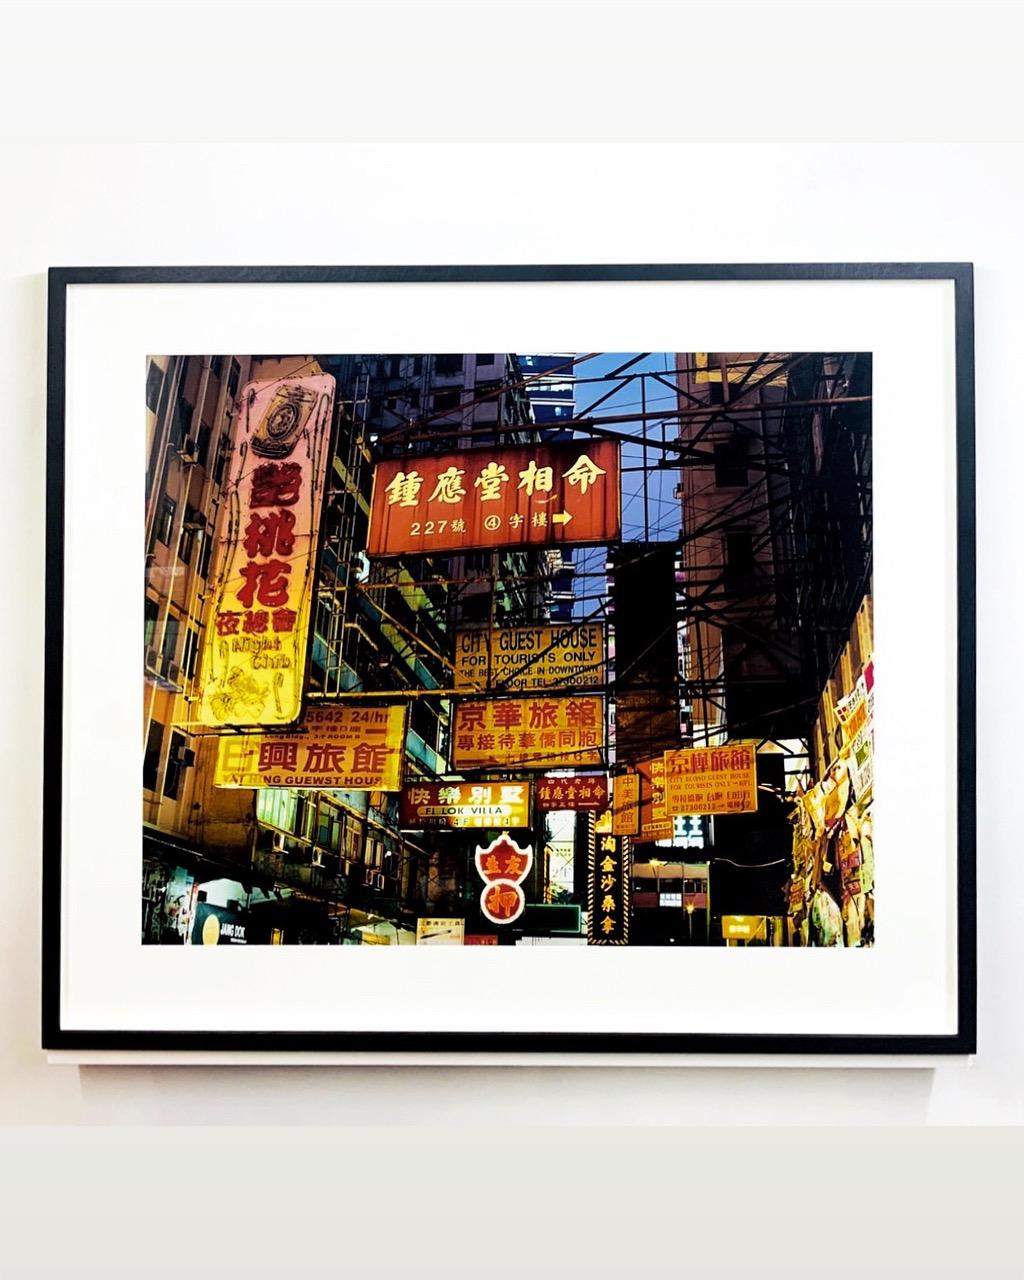 Best Choice in Downtown, Kowloon, Hong Kong - Asian Architecture Photography - Print by Richard Heeps